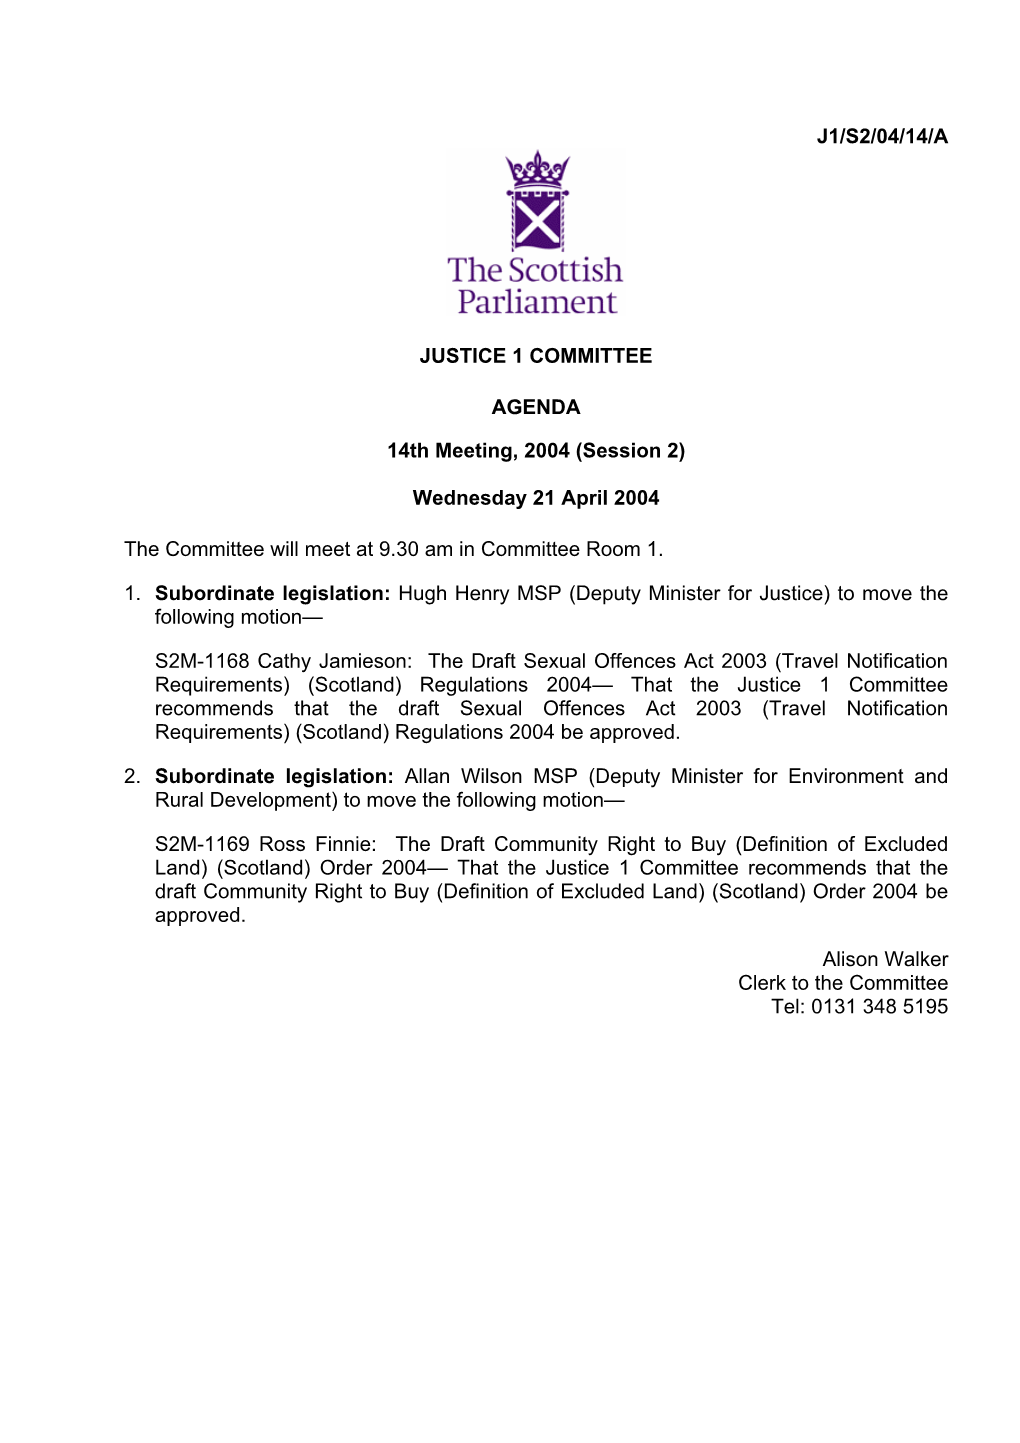 J1/S2/04/14/A JUSTICE 1 COMMITTEE AGENDA 14Th